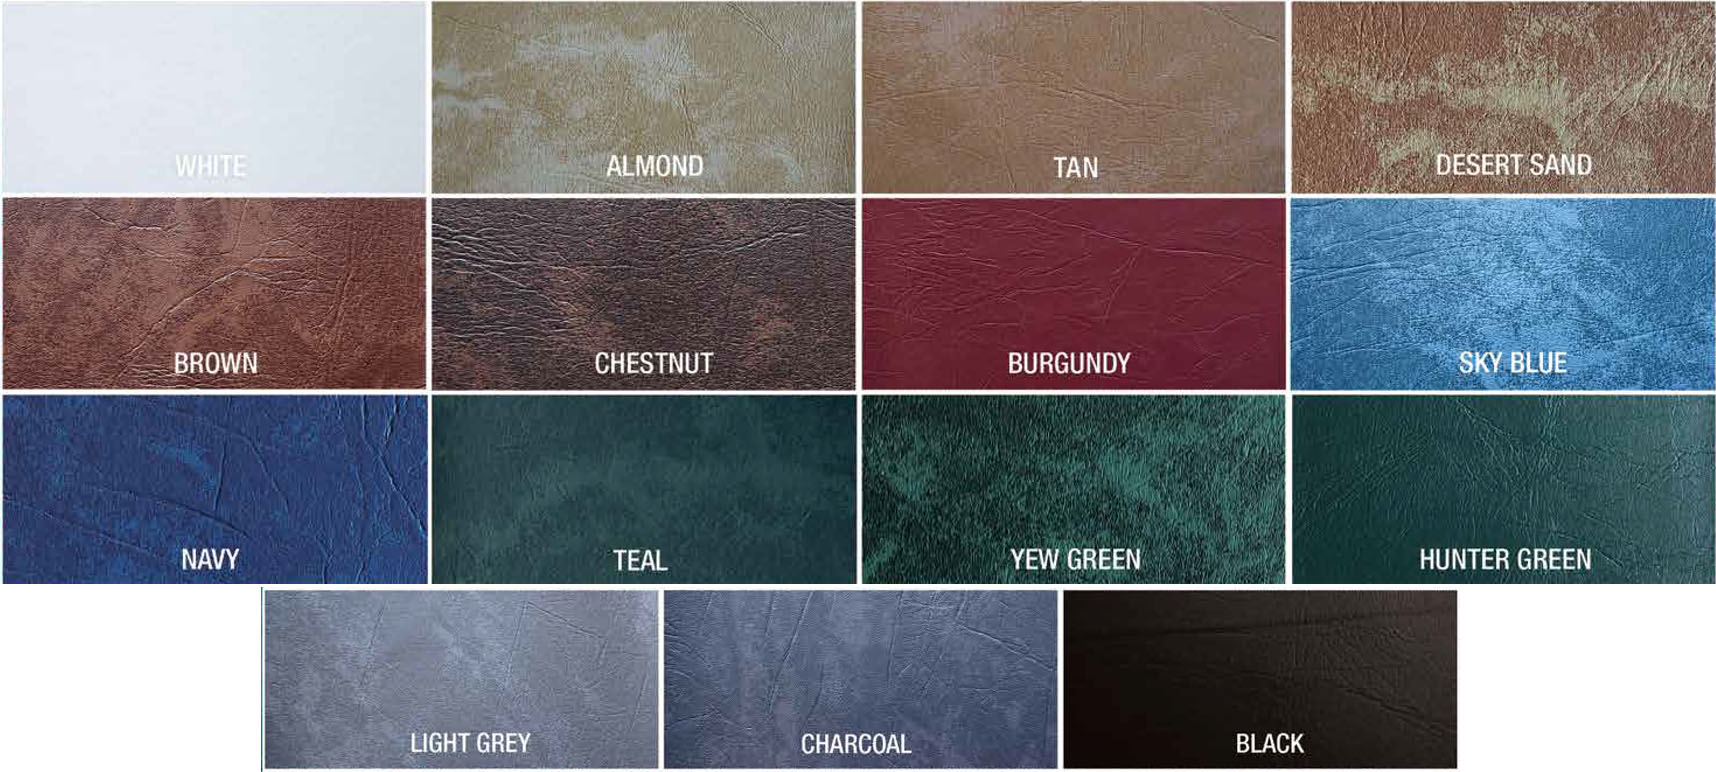 Hot Tub Cover Swatches